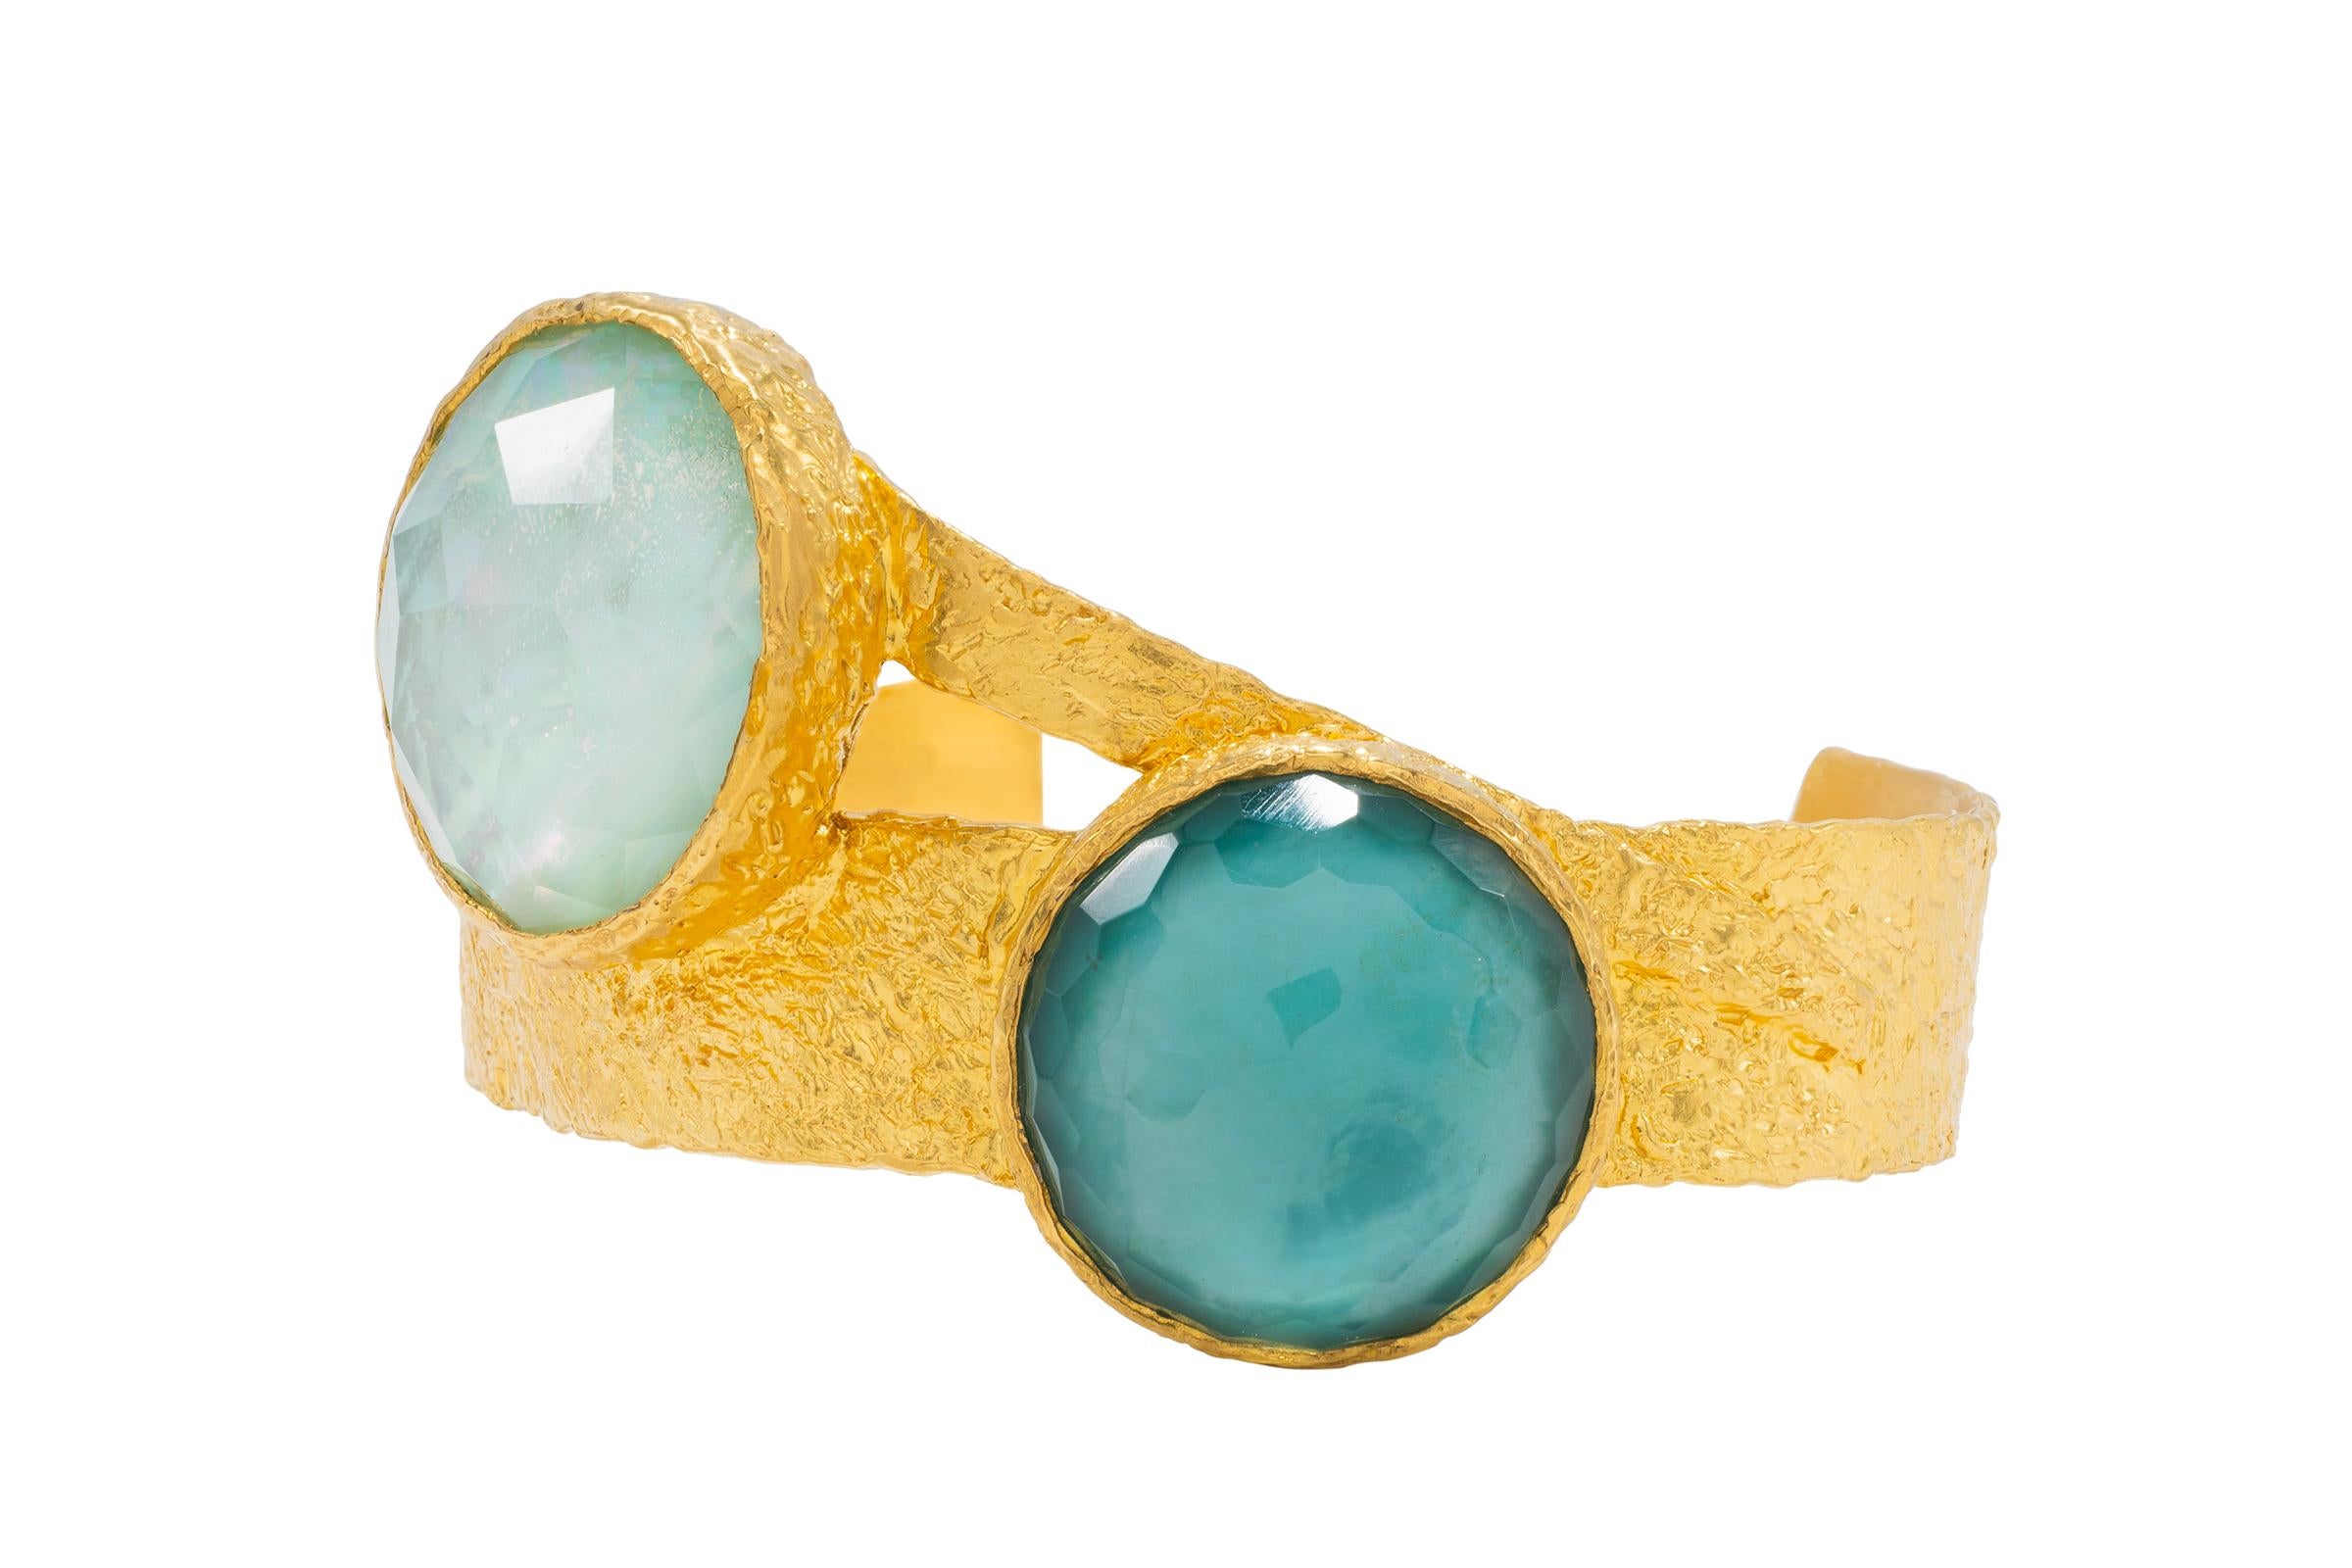 Round Cut Eclipse 22k Gold Cuff with Turquoise, Pearl and Quartz, by Tagili